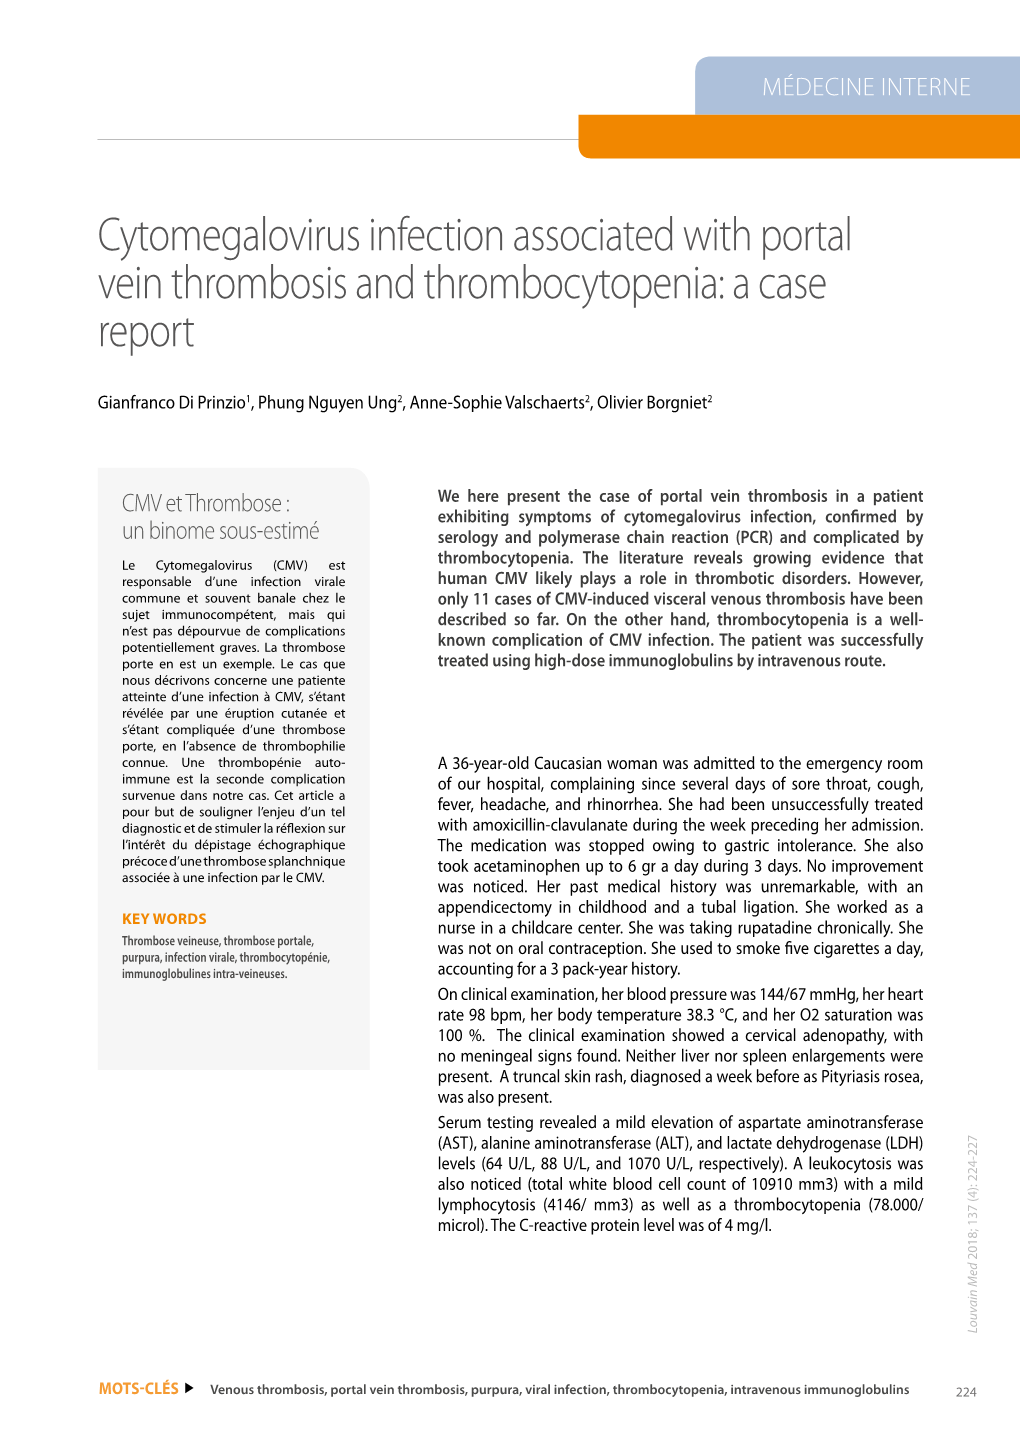 Cytomegalovirus Infection Associated with Portal Vein Thrombosis and Thrombocytopenia: a Case Report